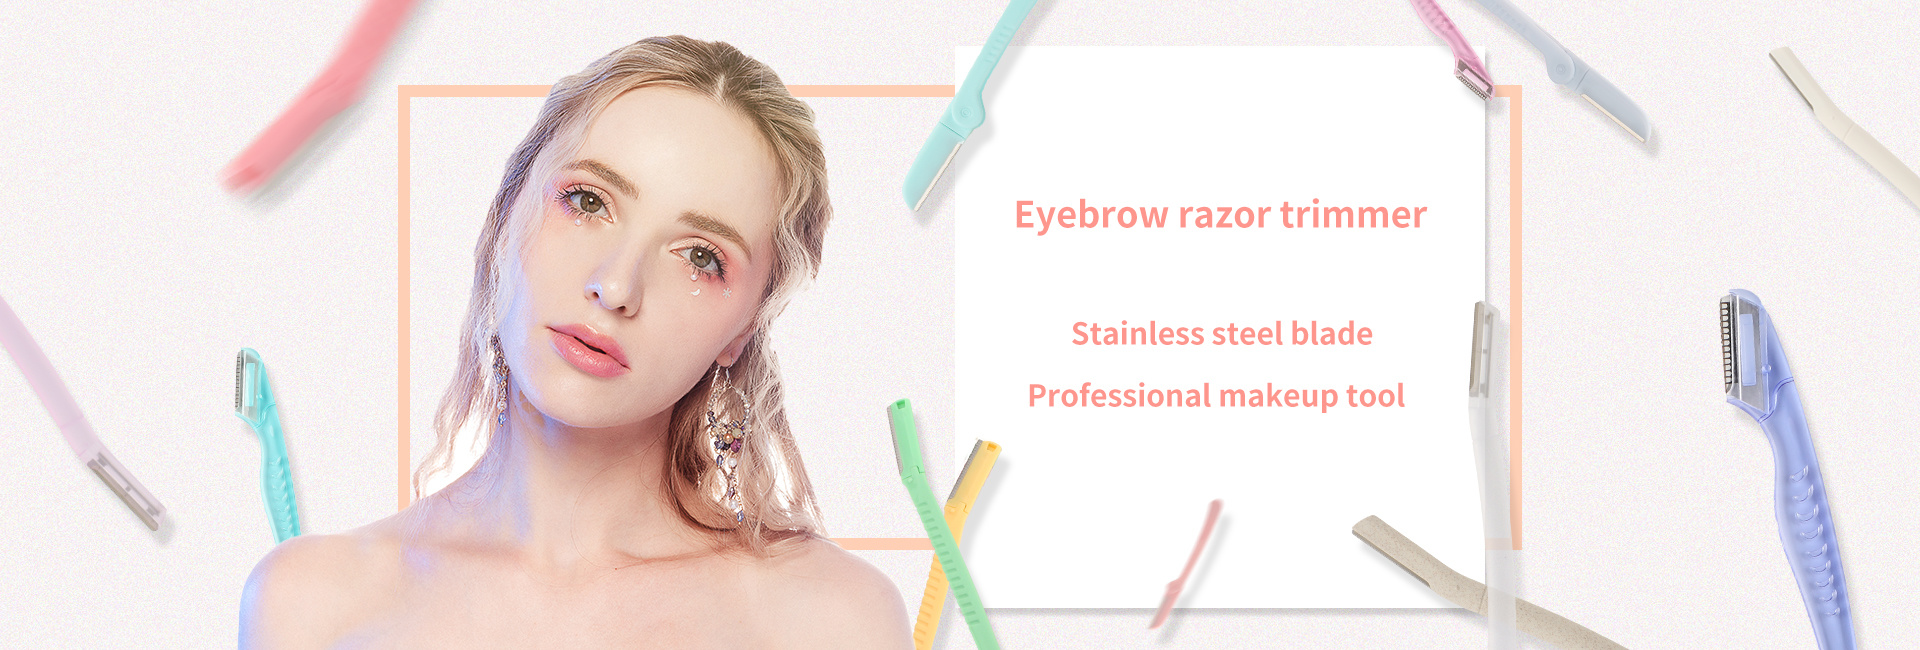 10 Best Eyebrow Razors for Smooth Eyebrow Trimming